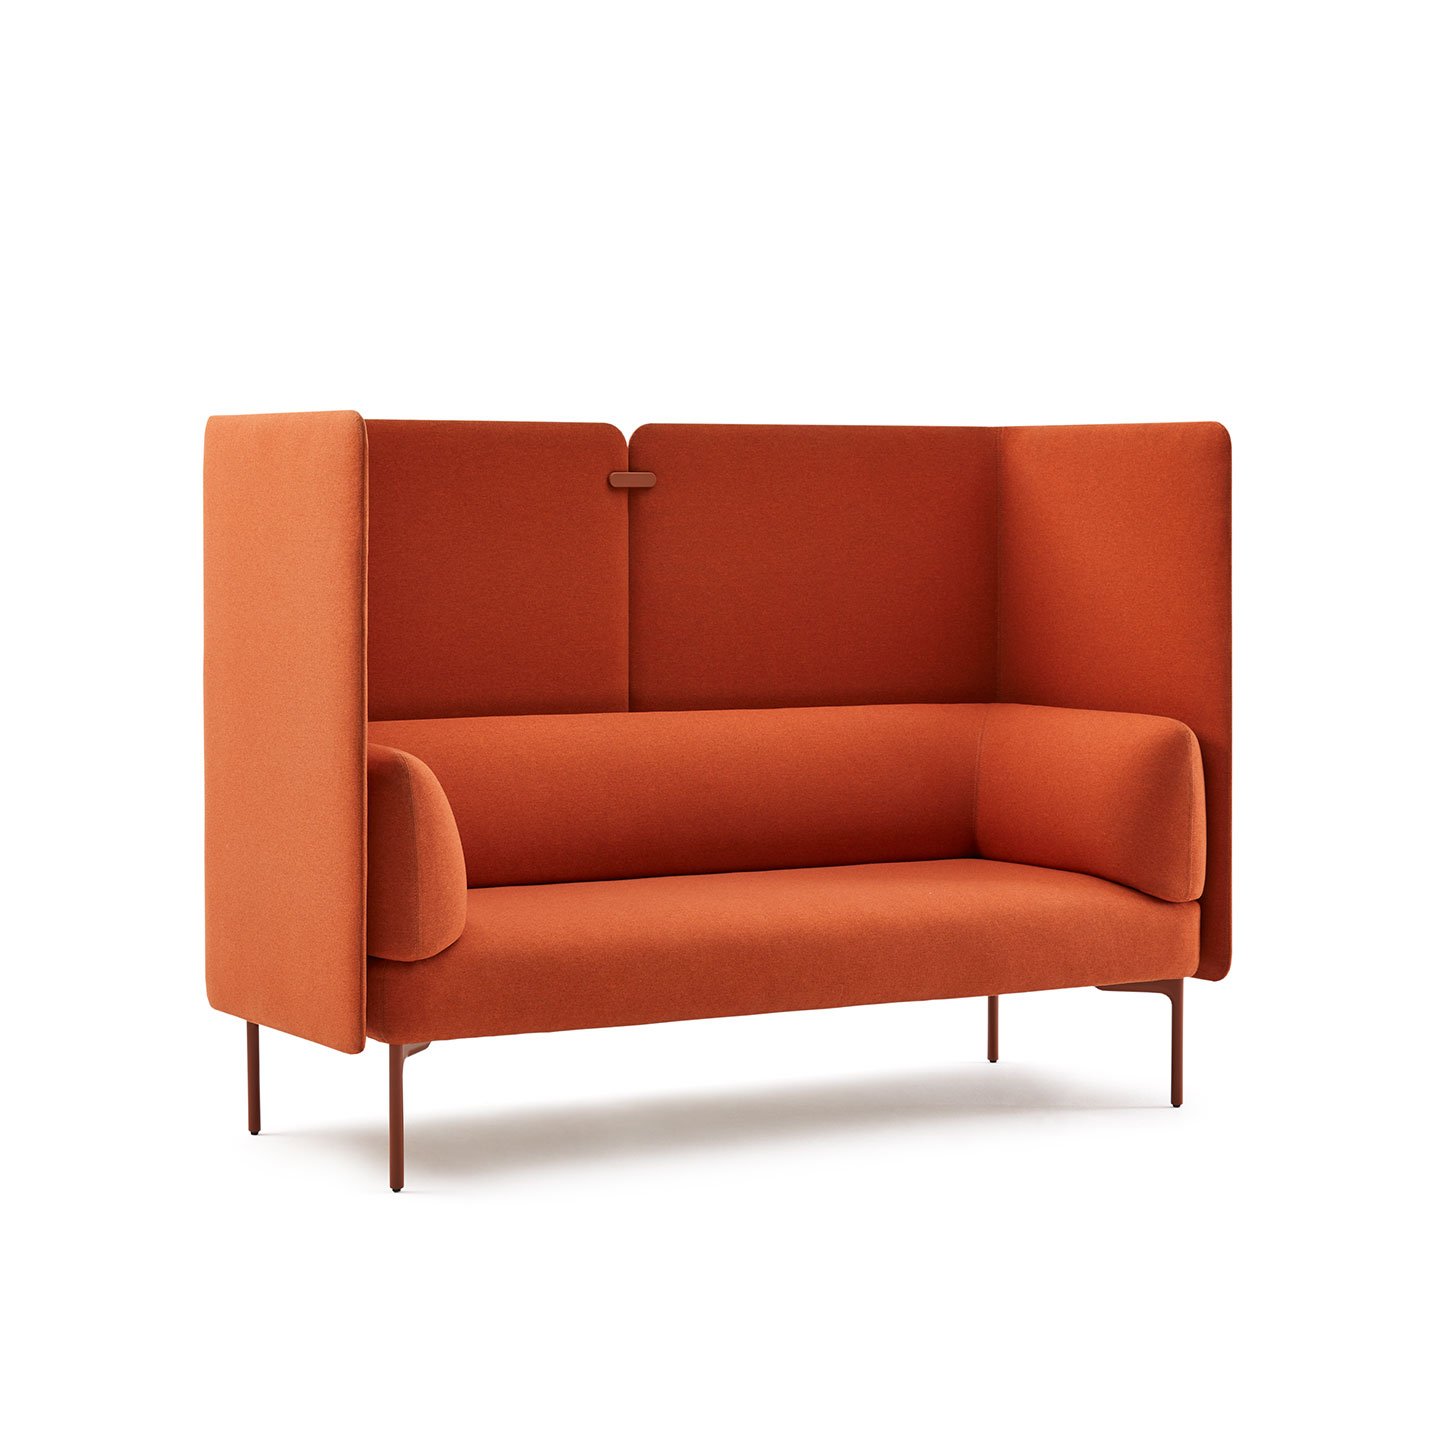 Haworth Cabana Lounge in orange color with tall booth around it 